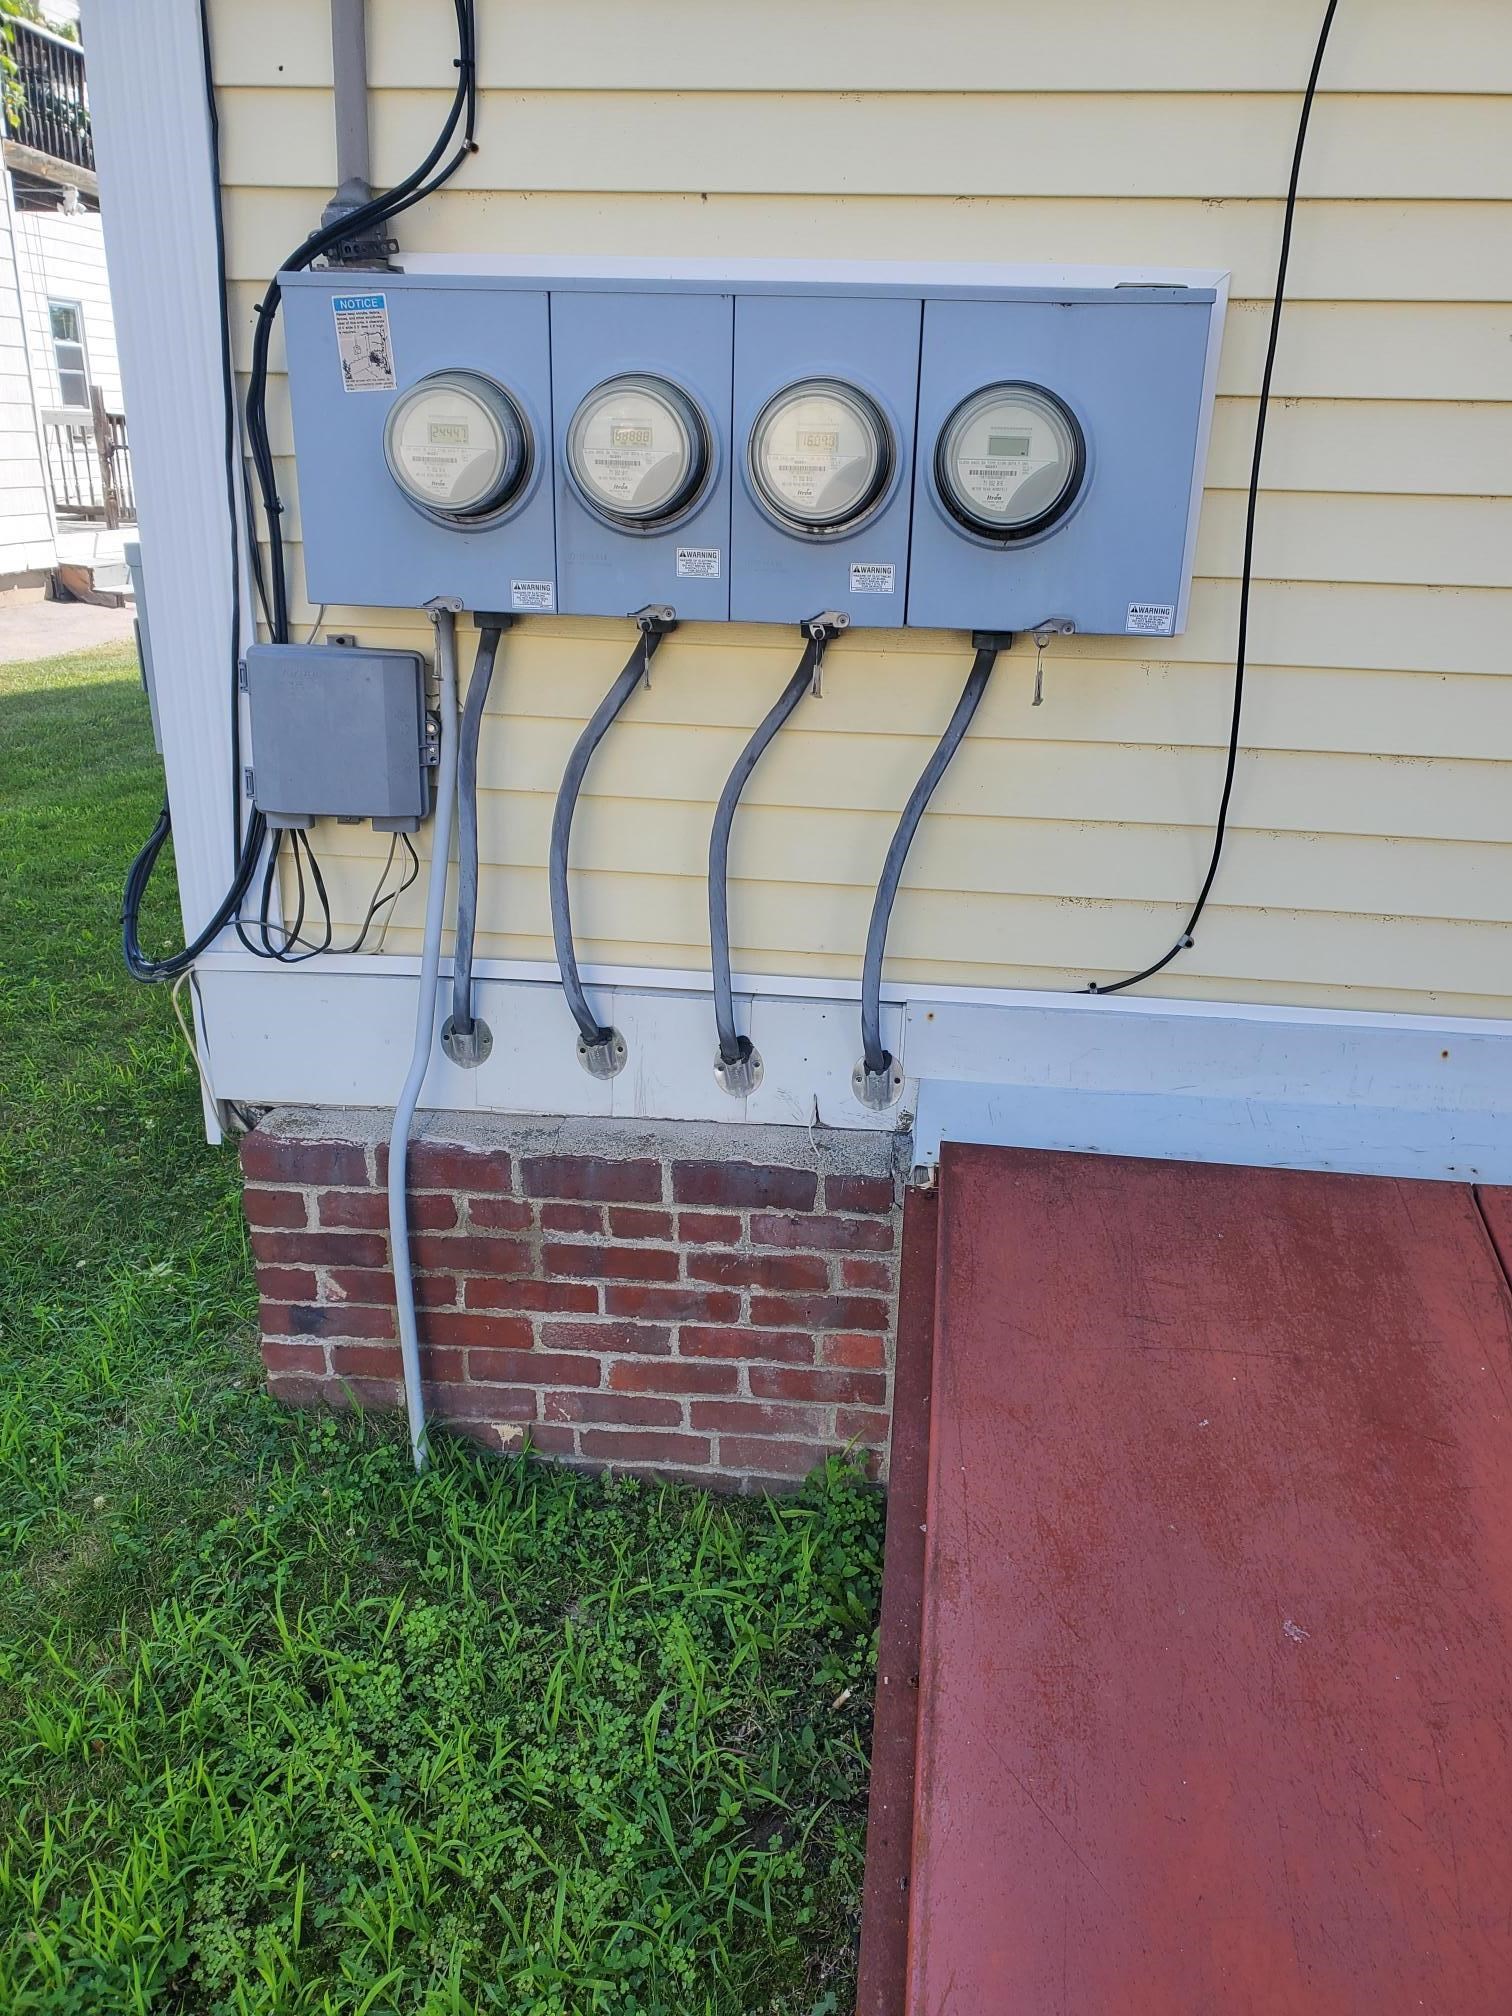 Electric Meters for the building